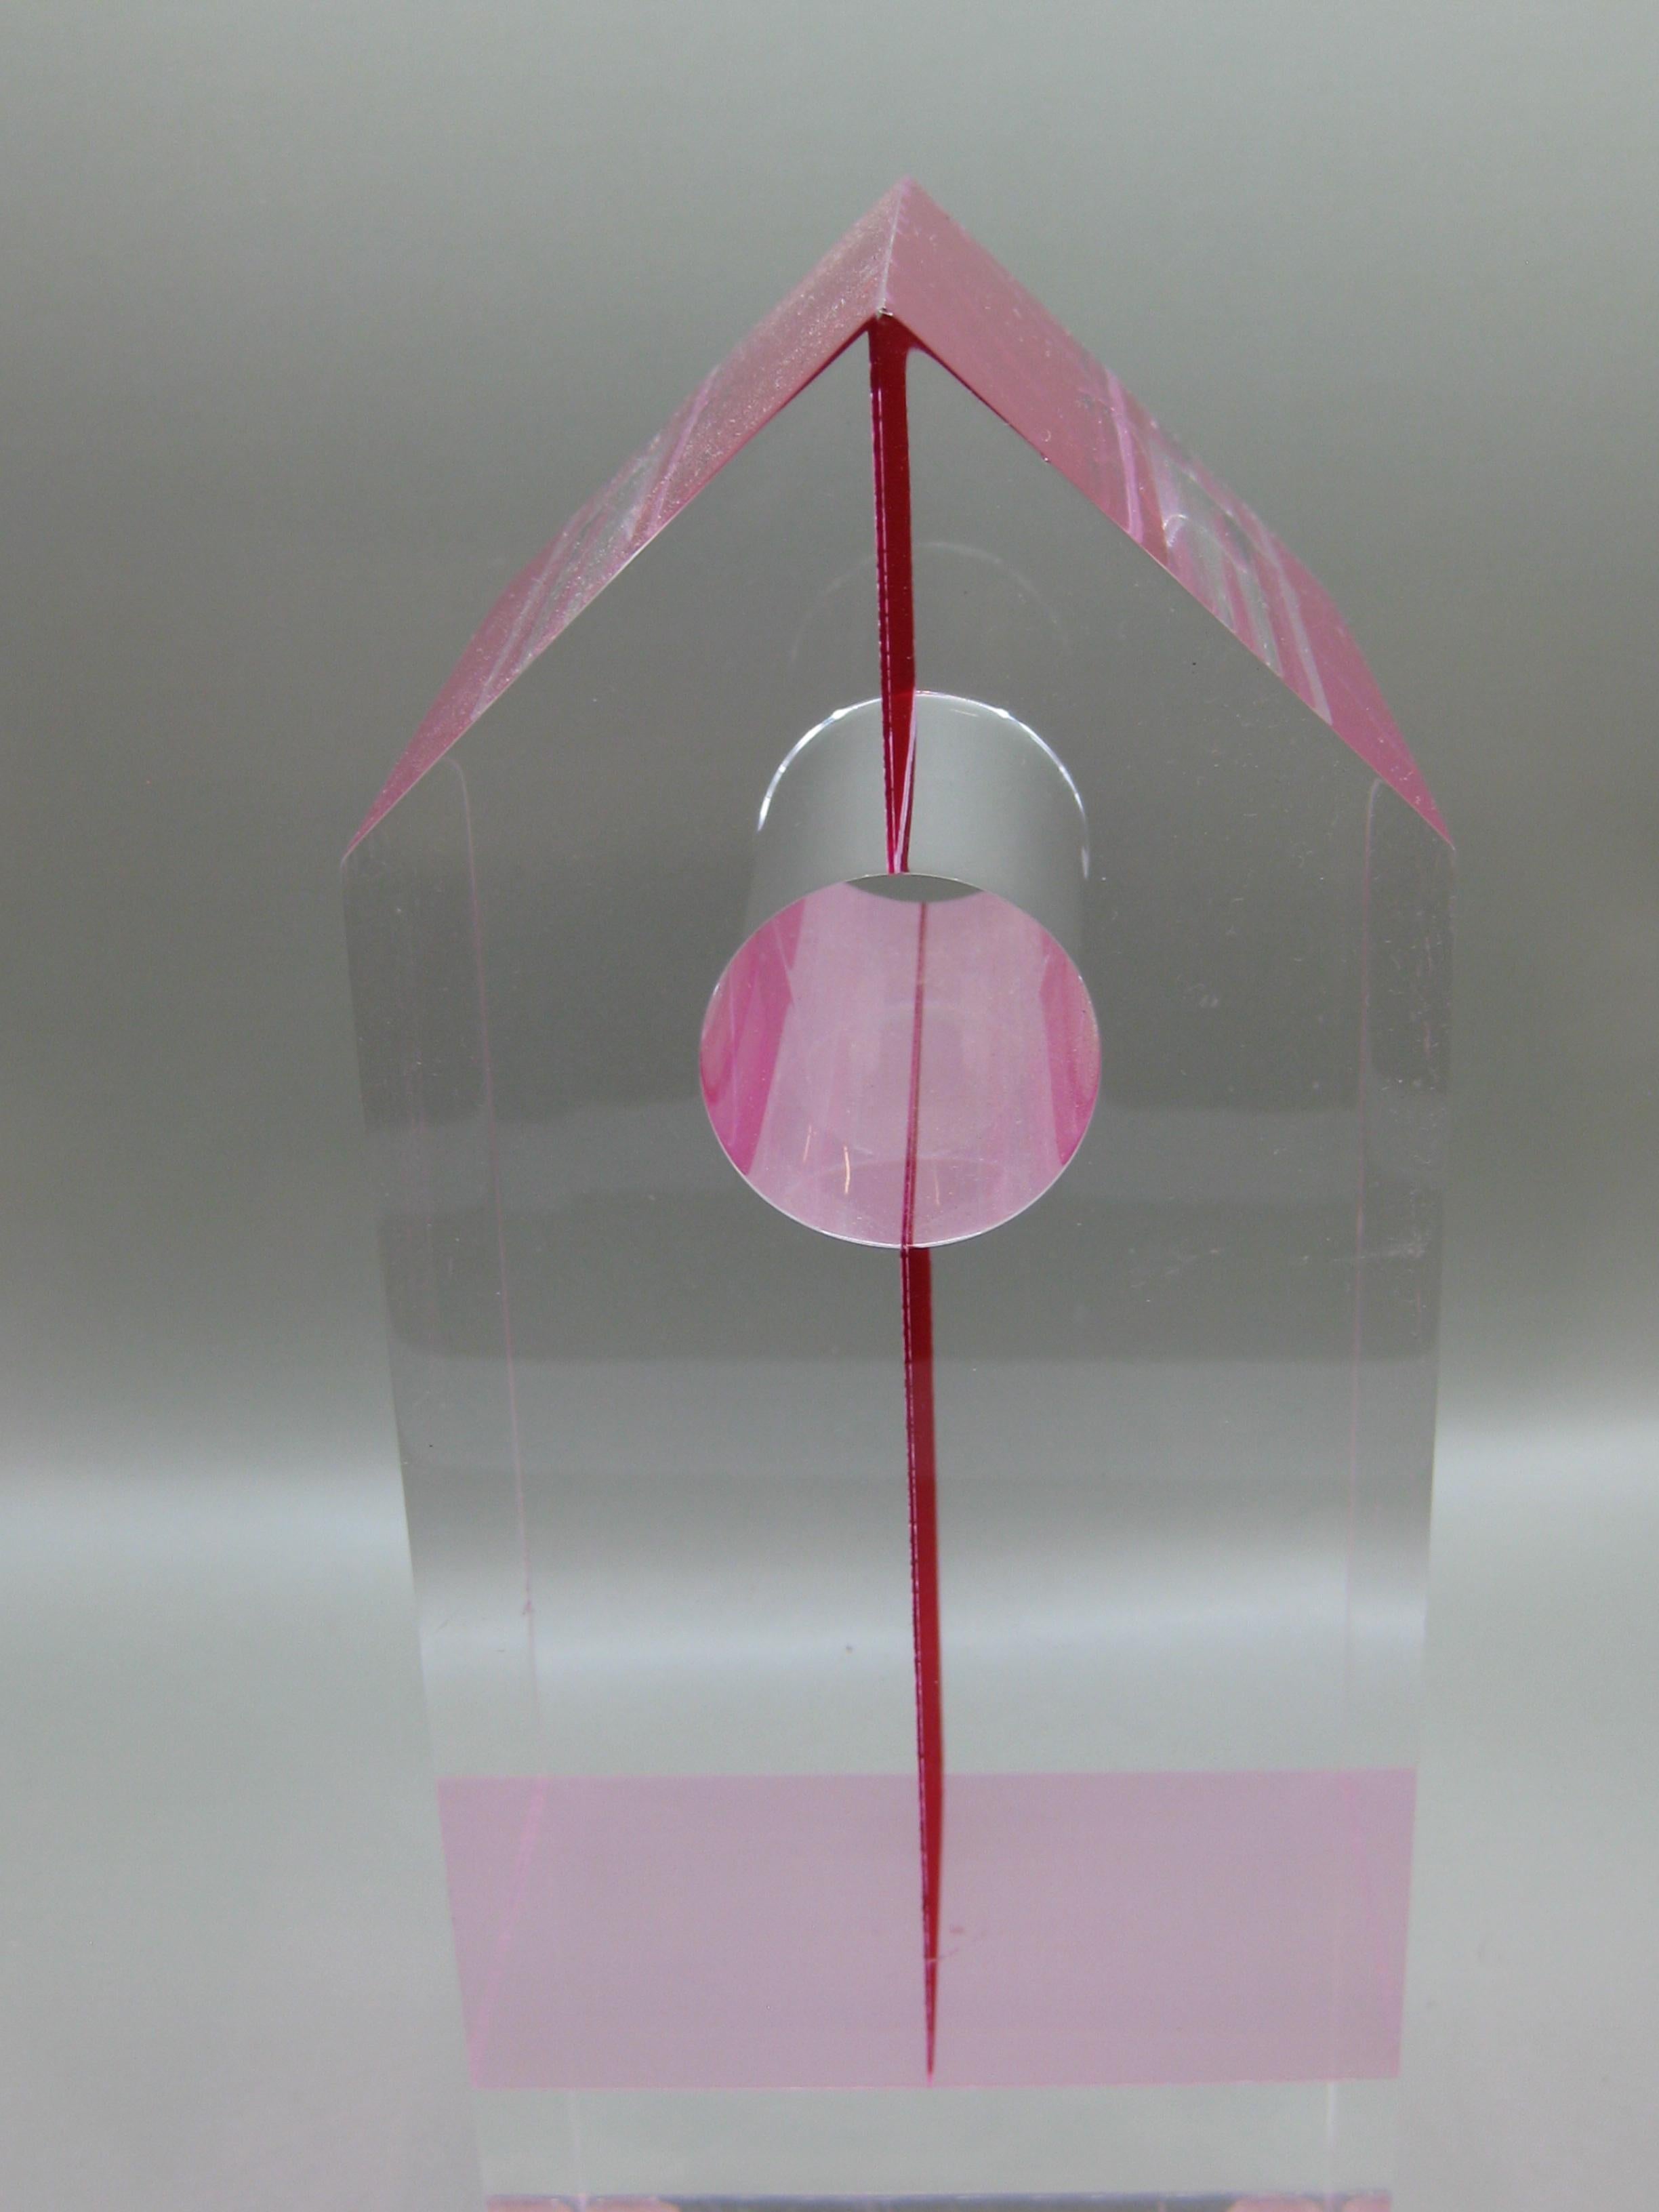 20th Century 1960's-1970's Lucite Acrylic Optical Op Art Abstract Sculpture For Sale